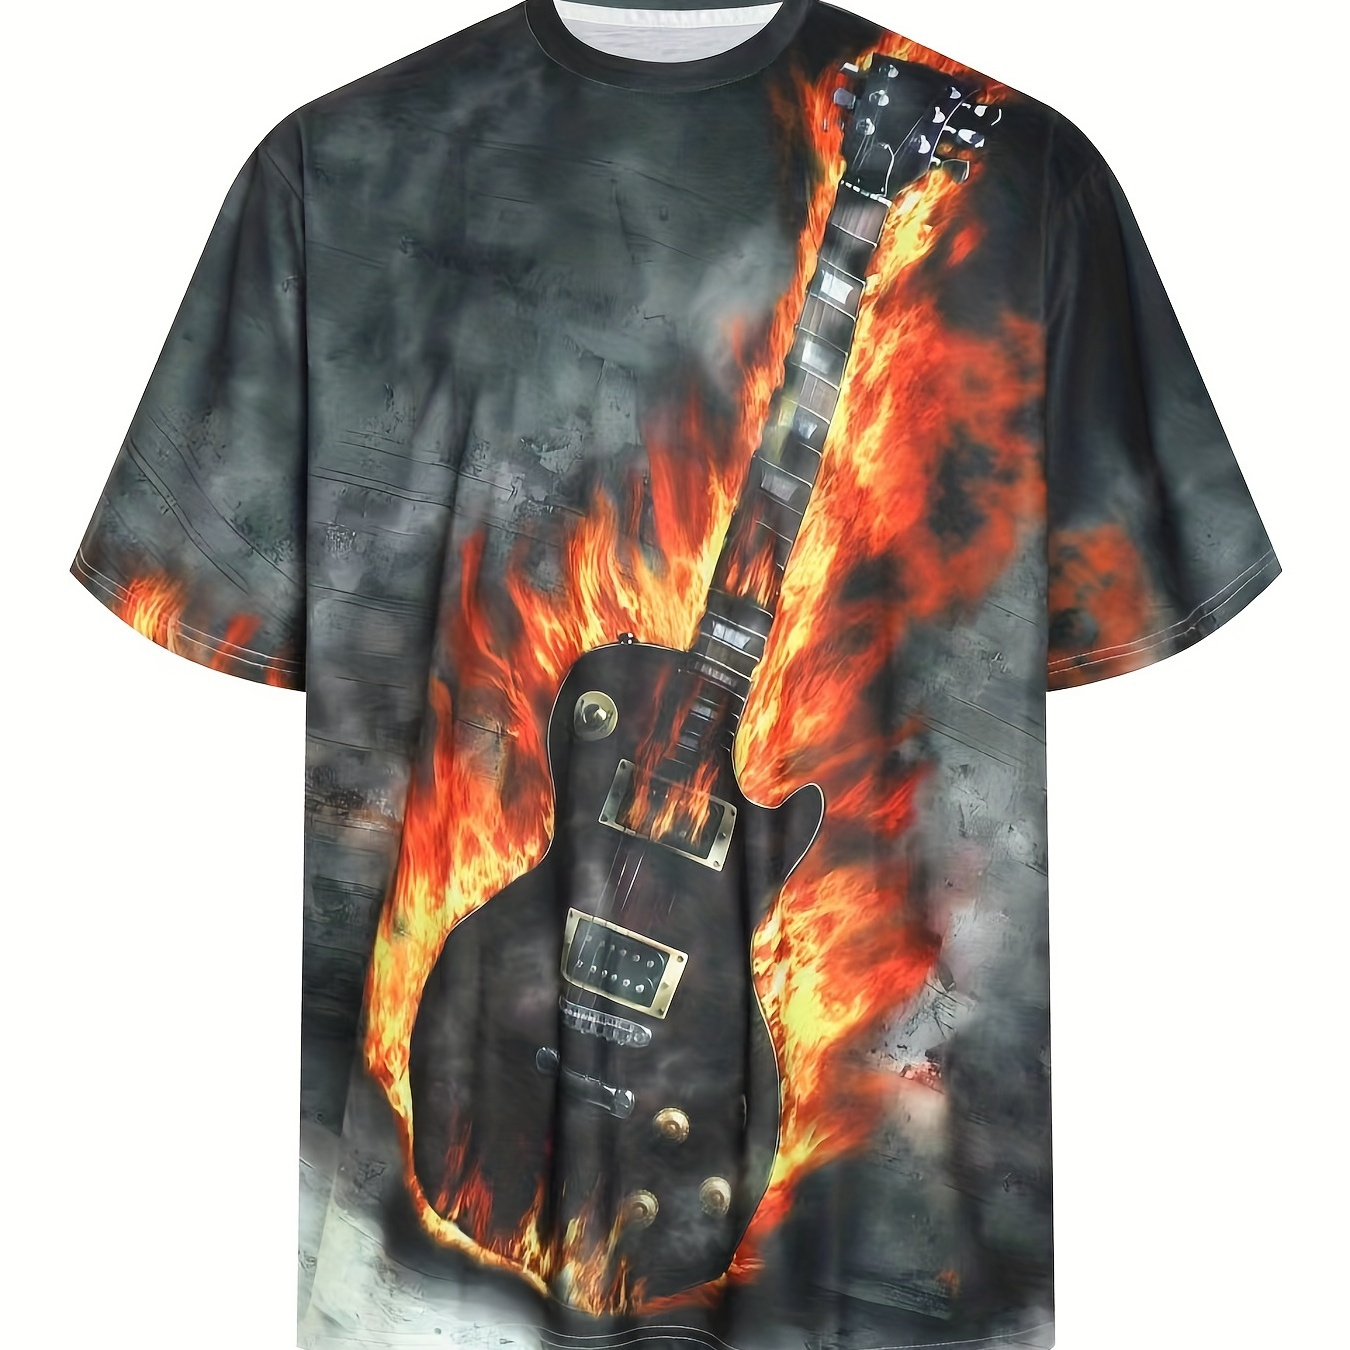 

Plus Size Men's Street Style Graphic Short-sleeve Crew Neck T-shirt, Fashion Oversized Fire Guitar Print Tee, Suit For Big & Tall Guys